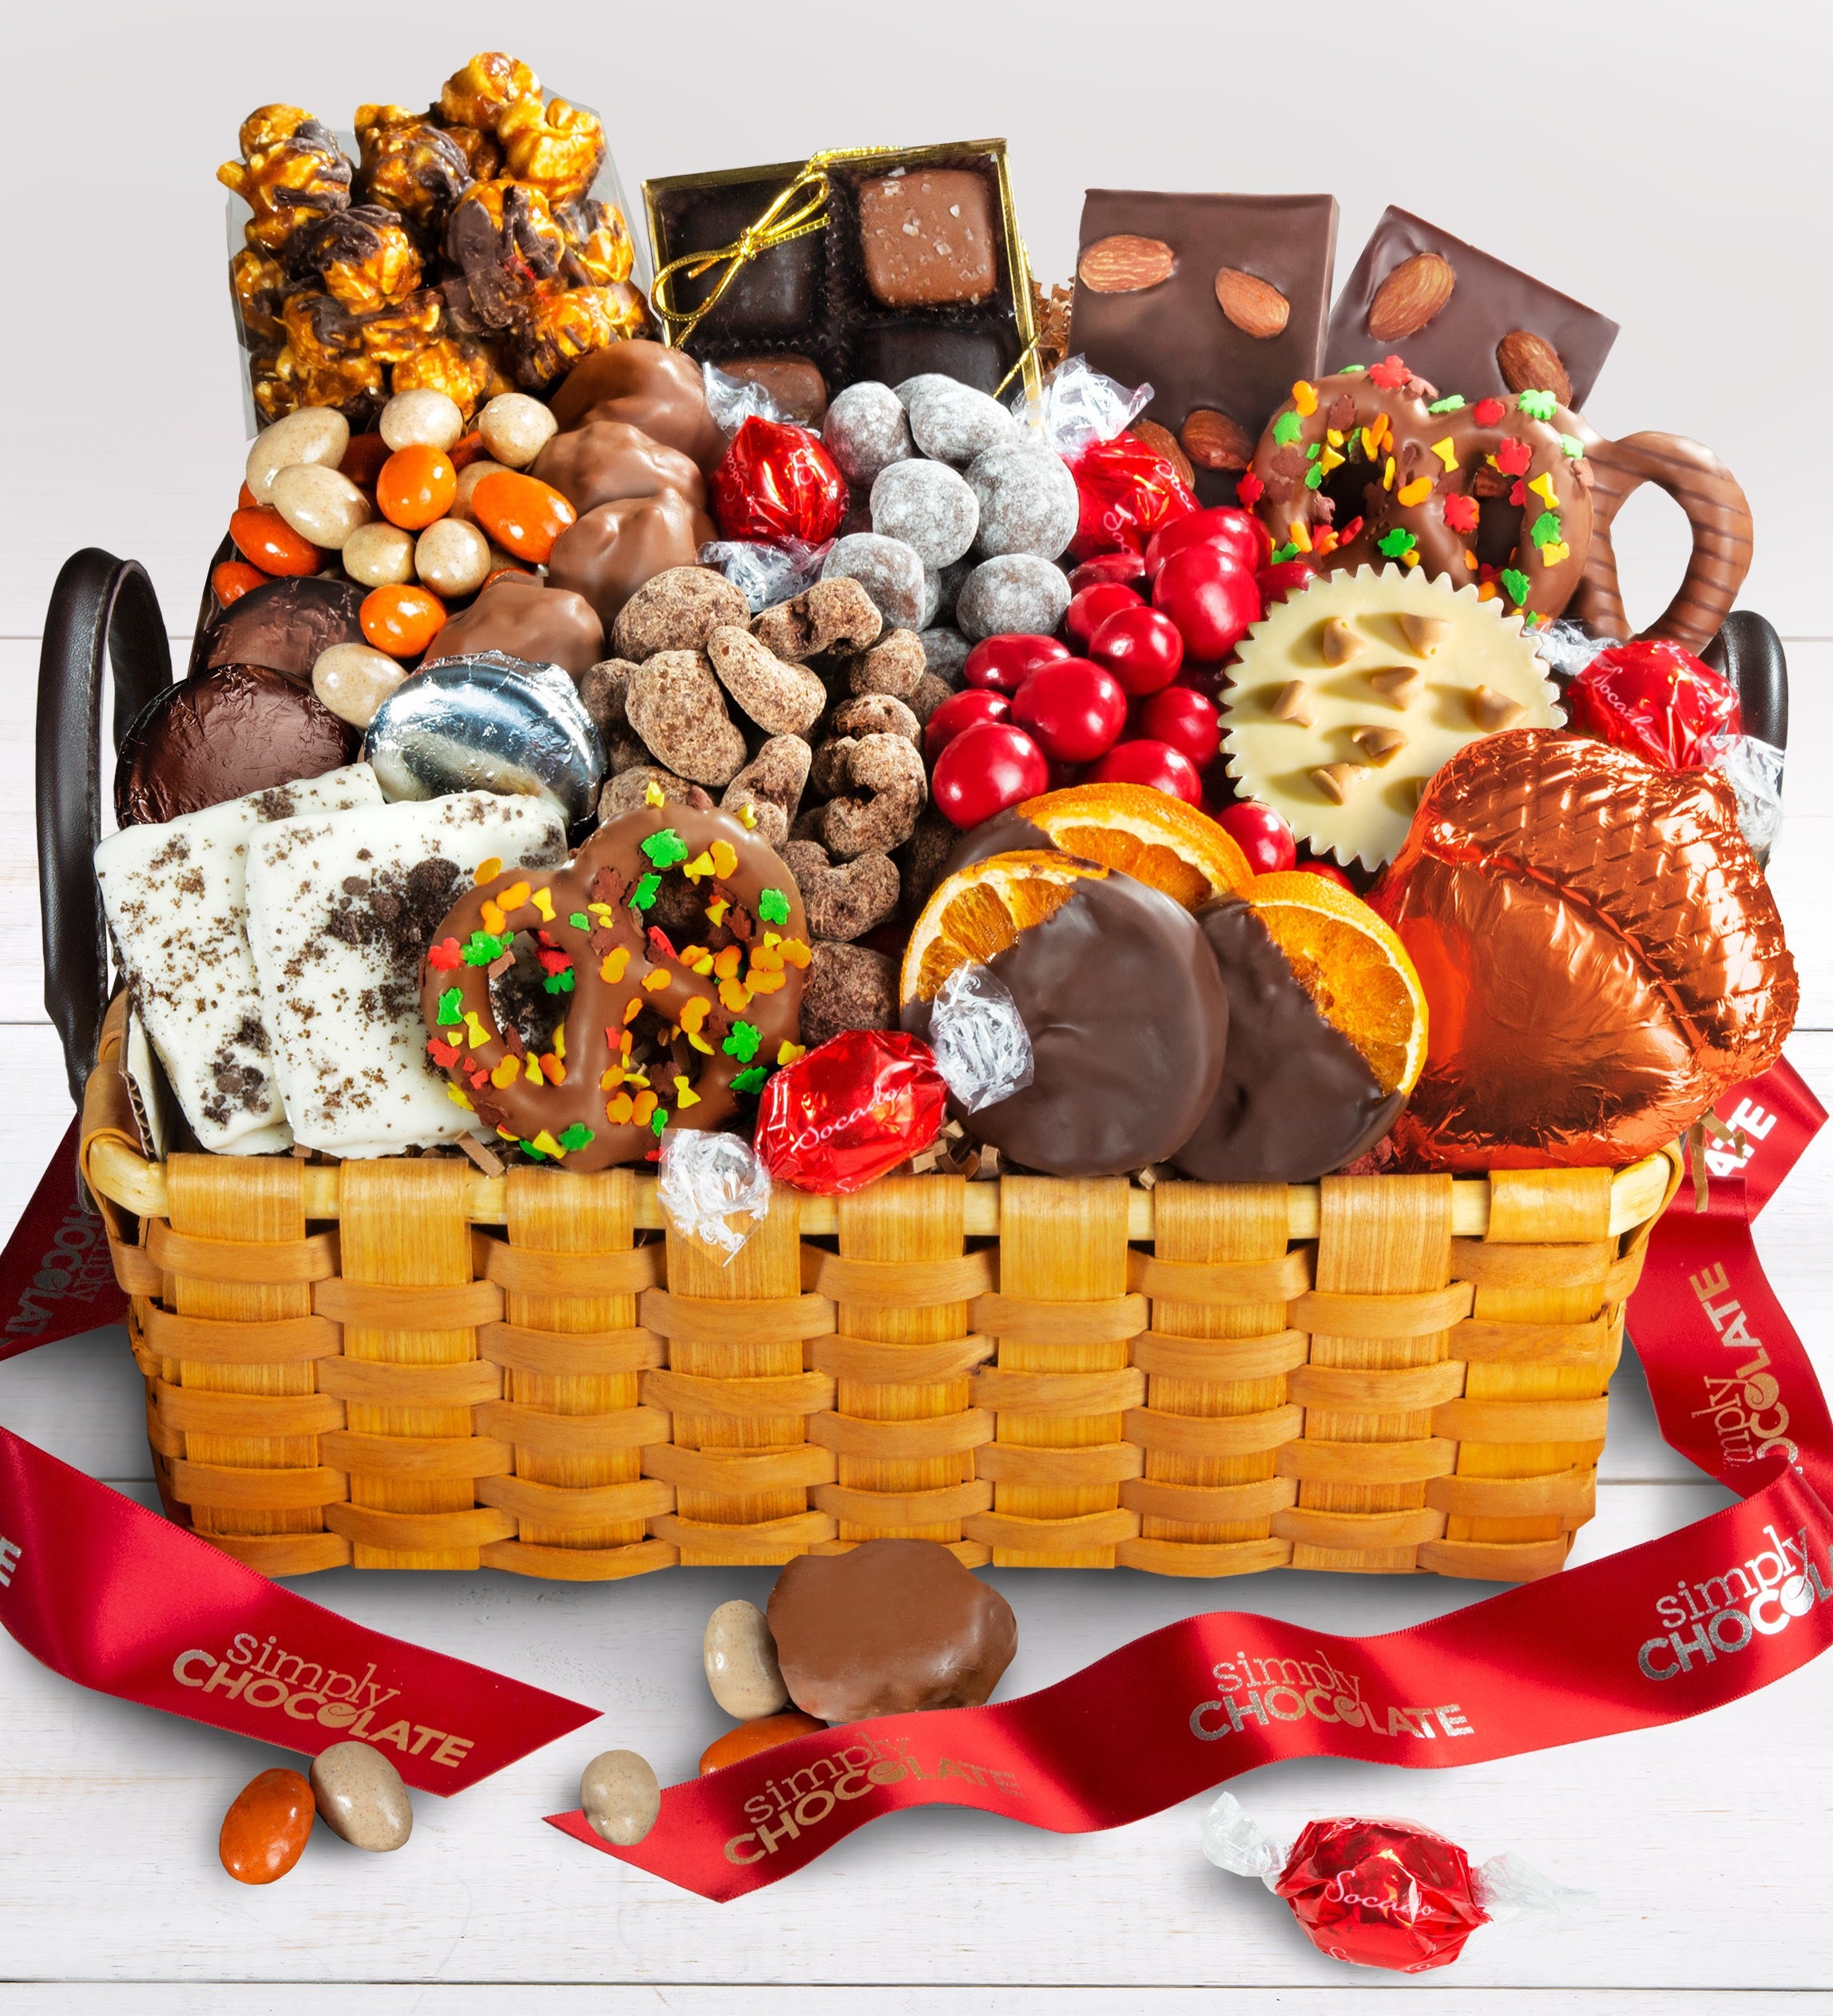 Simply Chocolate Grande Autumn Sweets Basket